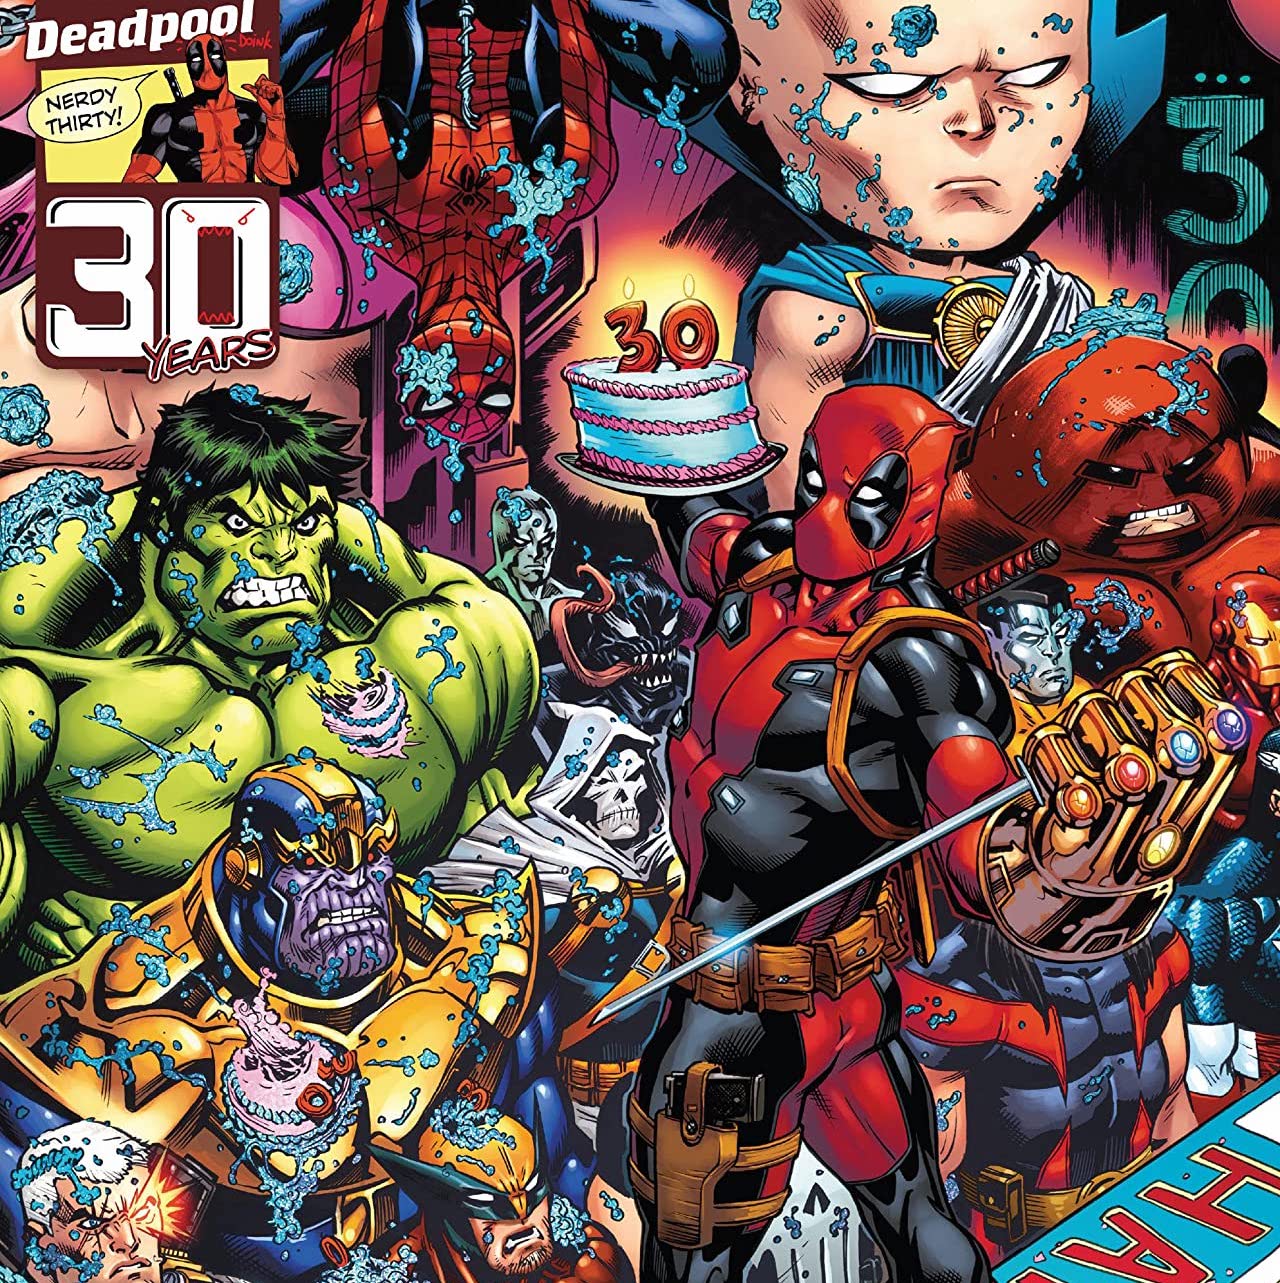 'Deadpool Nerdy 30' celebrates three decades of the Merc With a Mouth